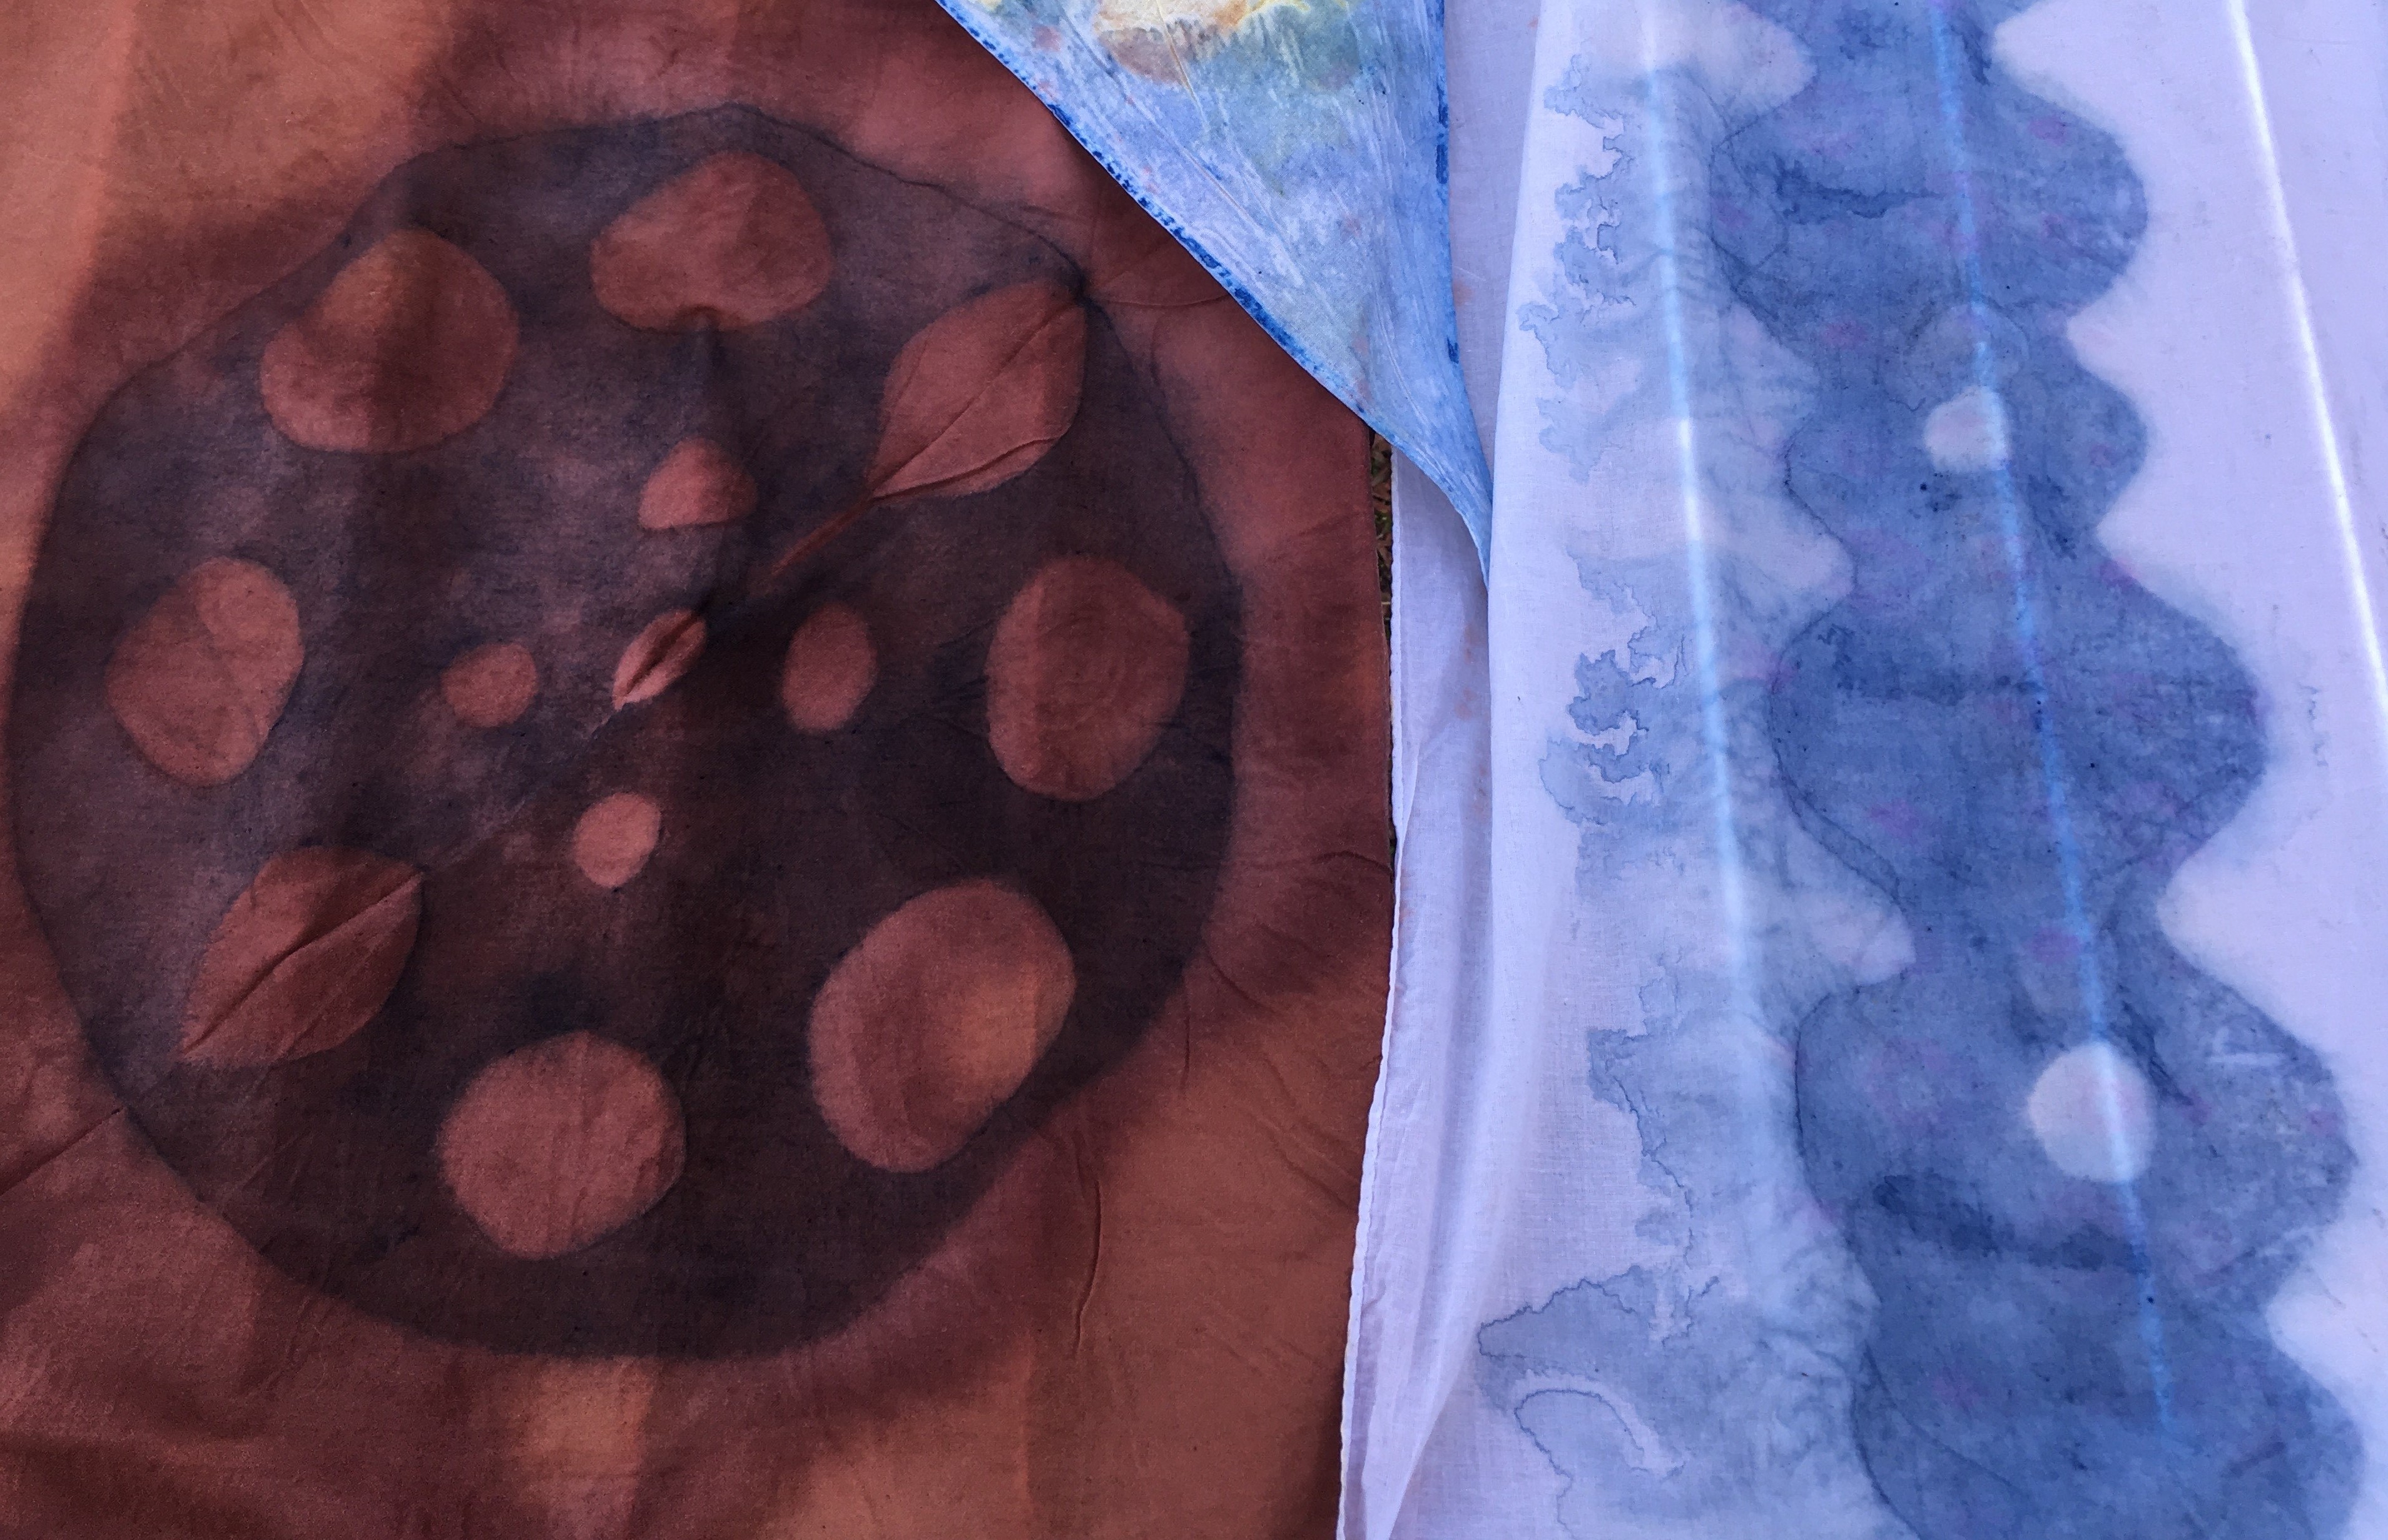 Selective Dyeing with Natural Dyes